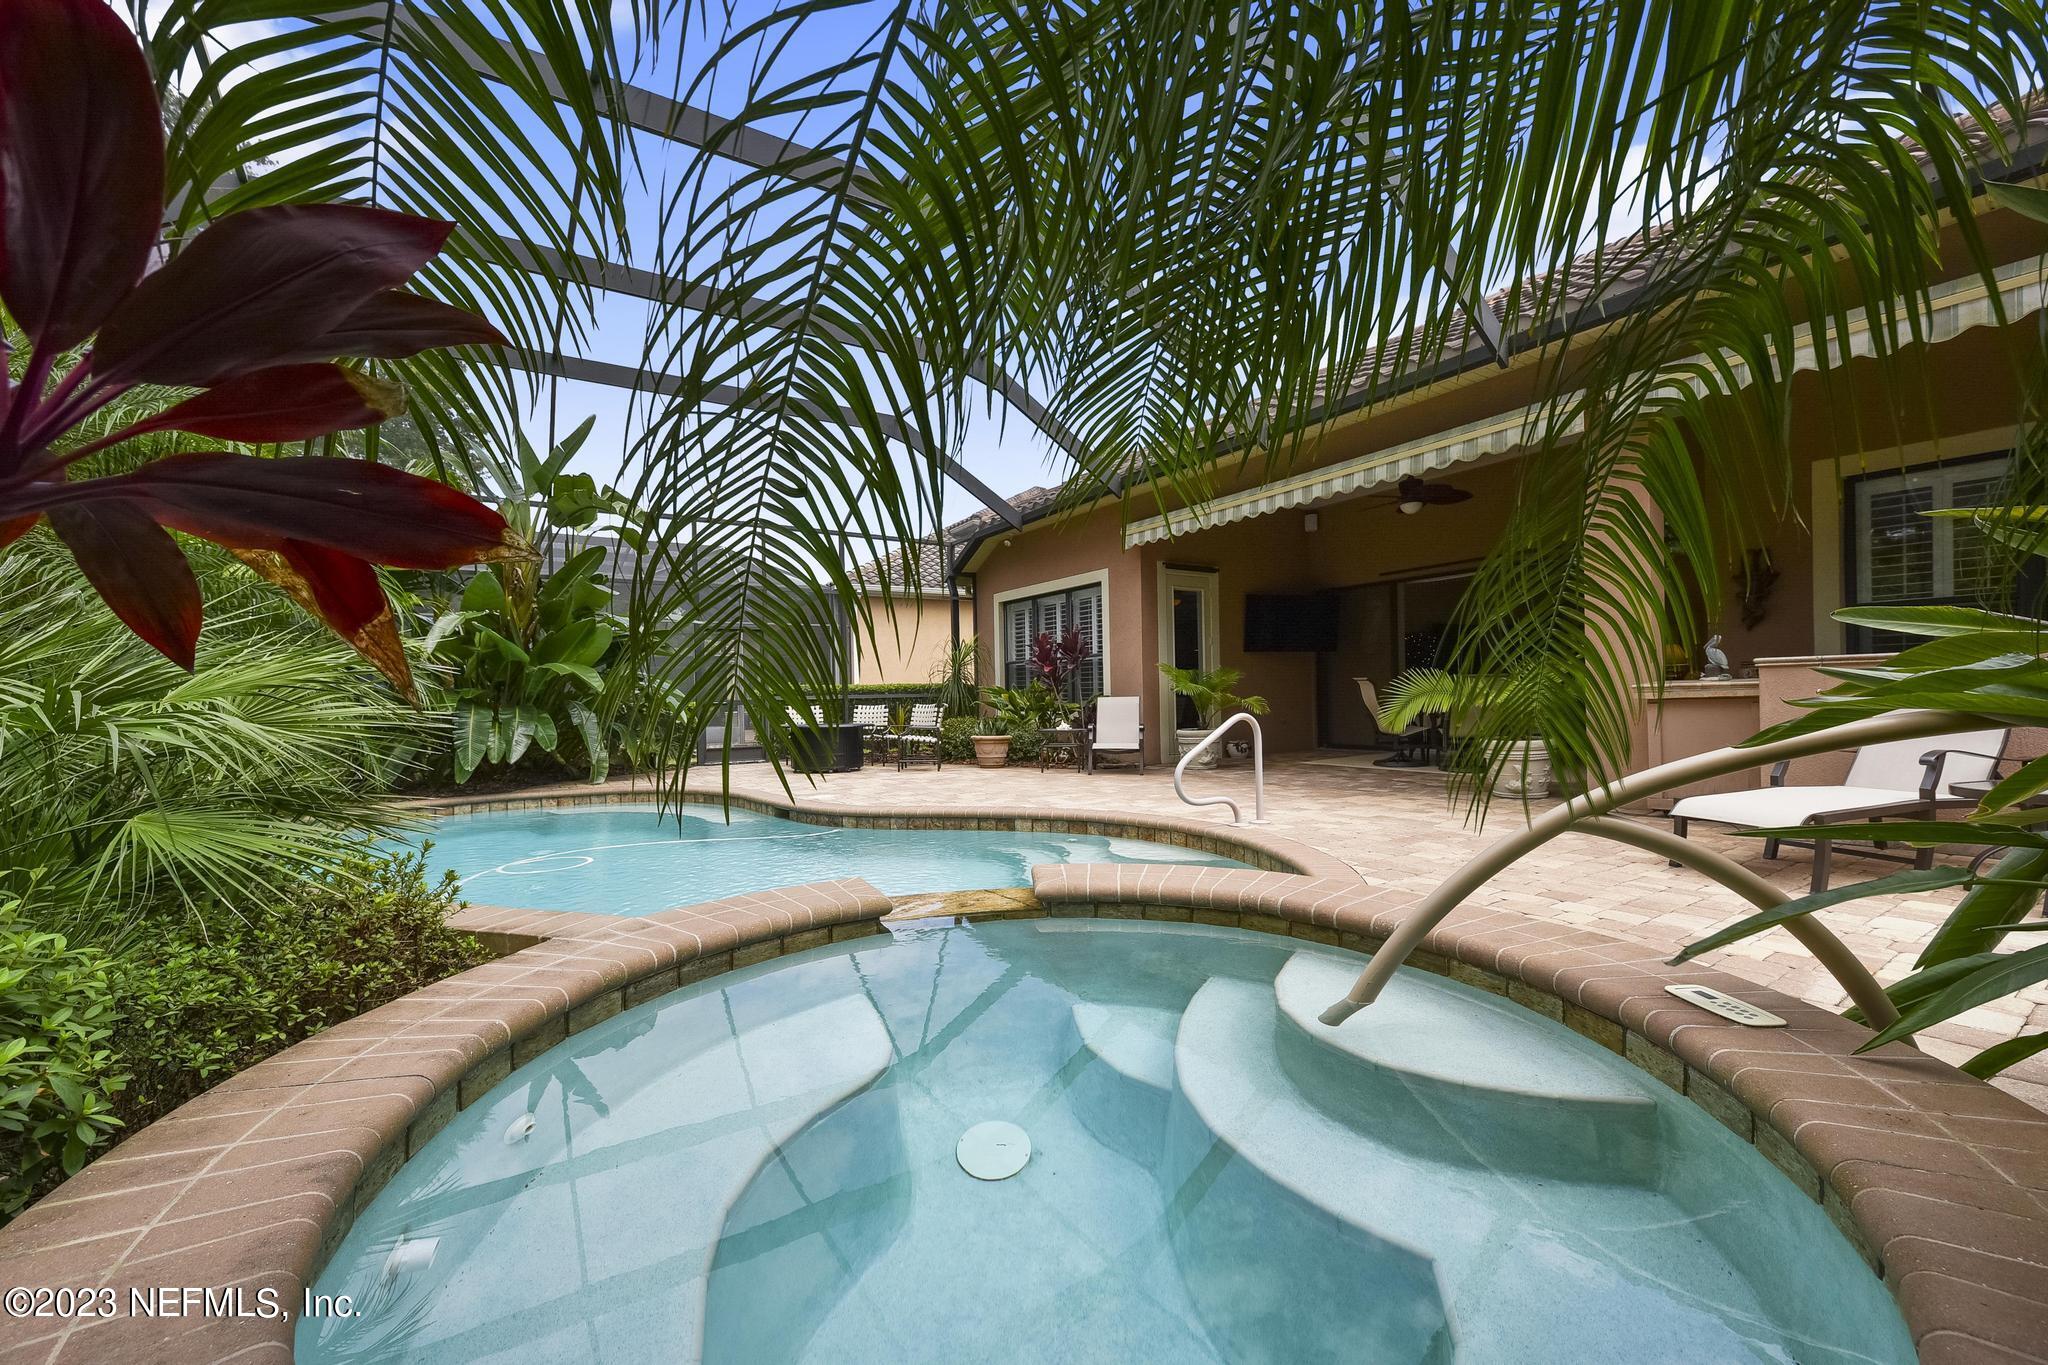 a view of swimming pool that has lawn chairs plants and palm trees